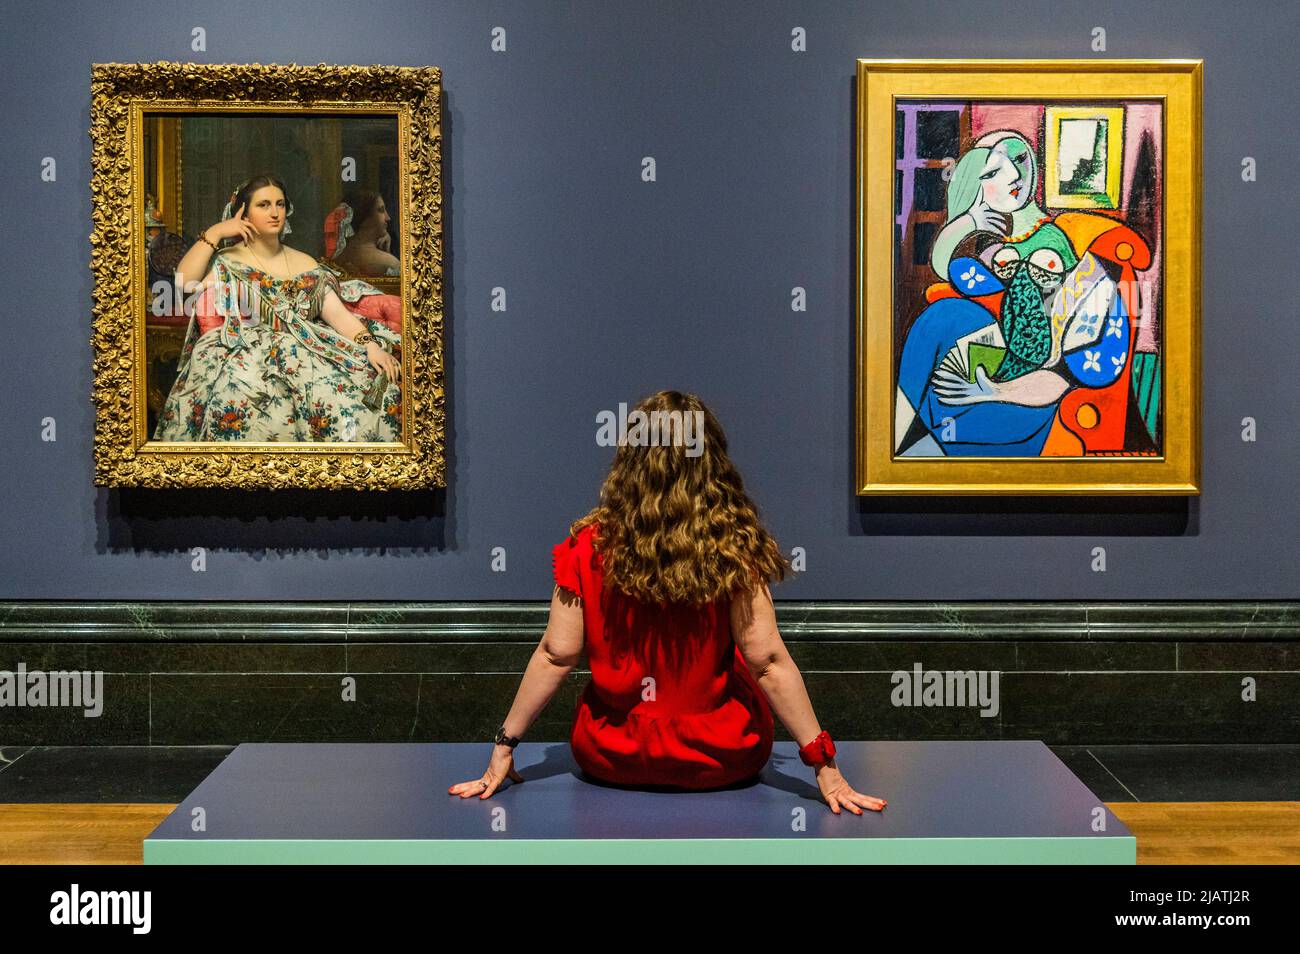 London, UK. 1st June, 2022. For the first time, Picasso's ‘Woman with a Book' (1932) from the Norton Simon Museum, California, is brought together with the painting that inspired it, ‘Madame Moitessier' (1856) by Jean-Auguste-Dominique Ingres, at the National Gallery. Credit: Guy Bell/Alamy Live News Stock Photo